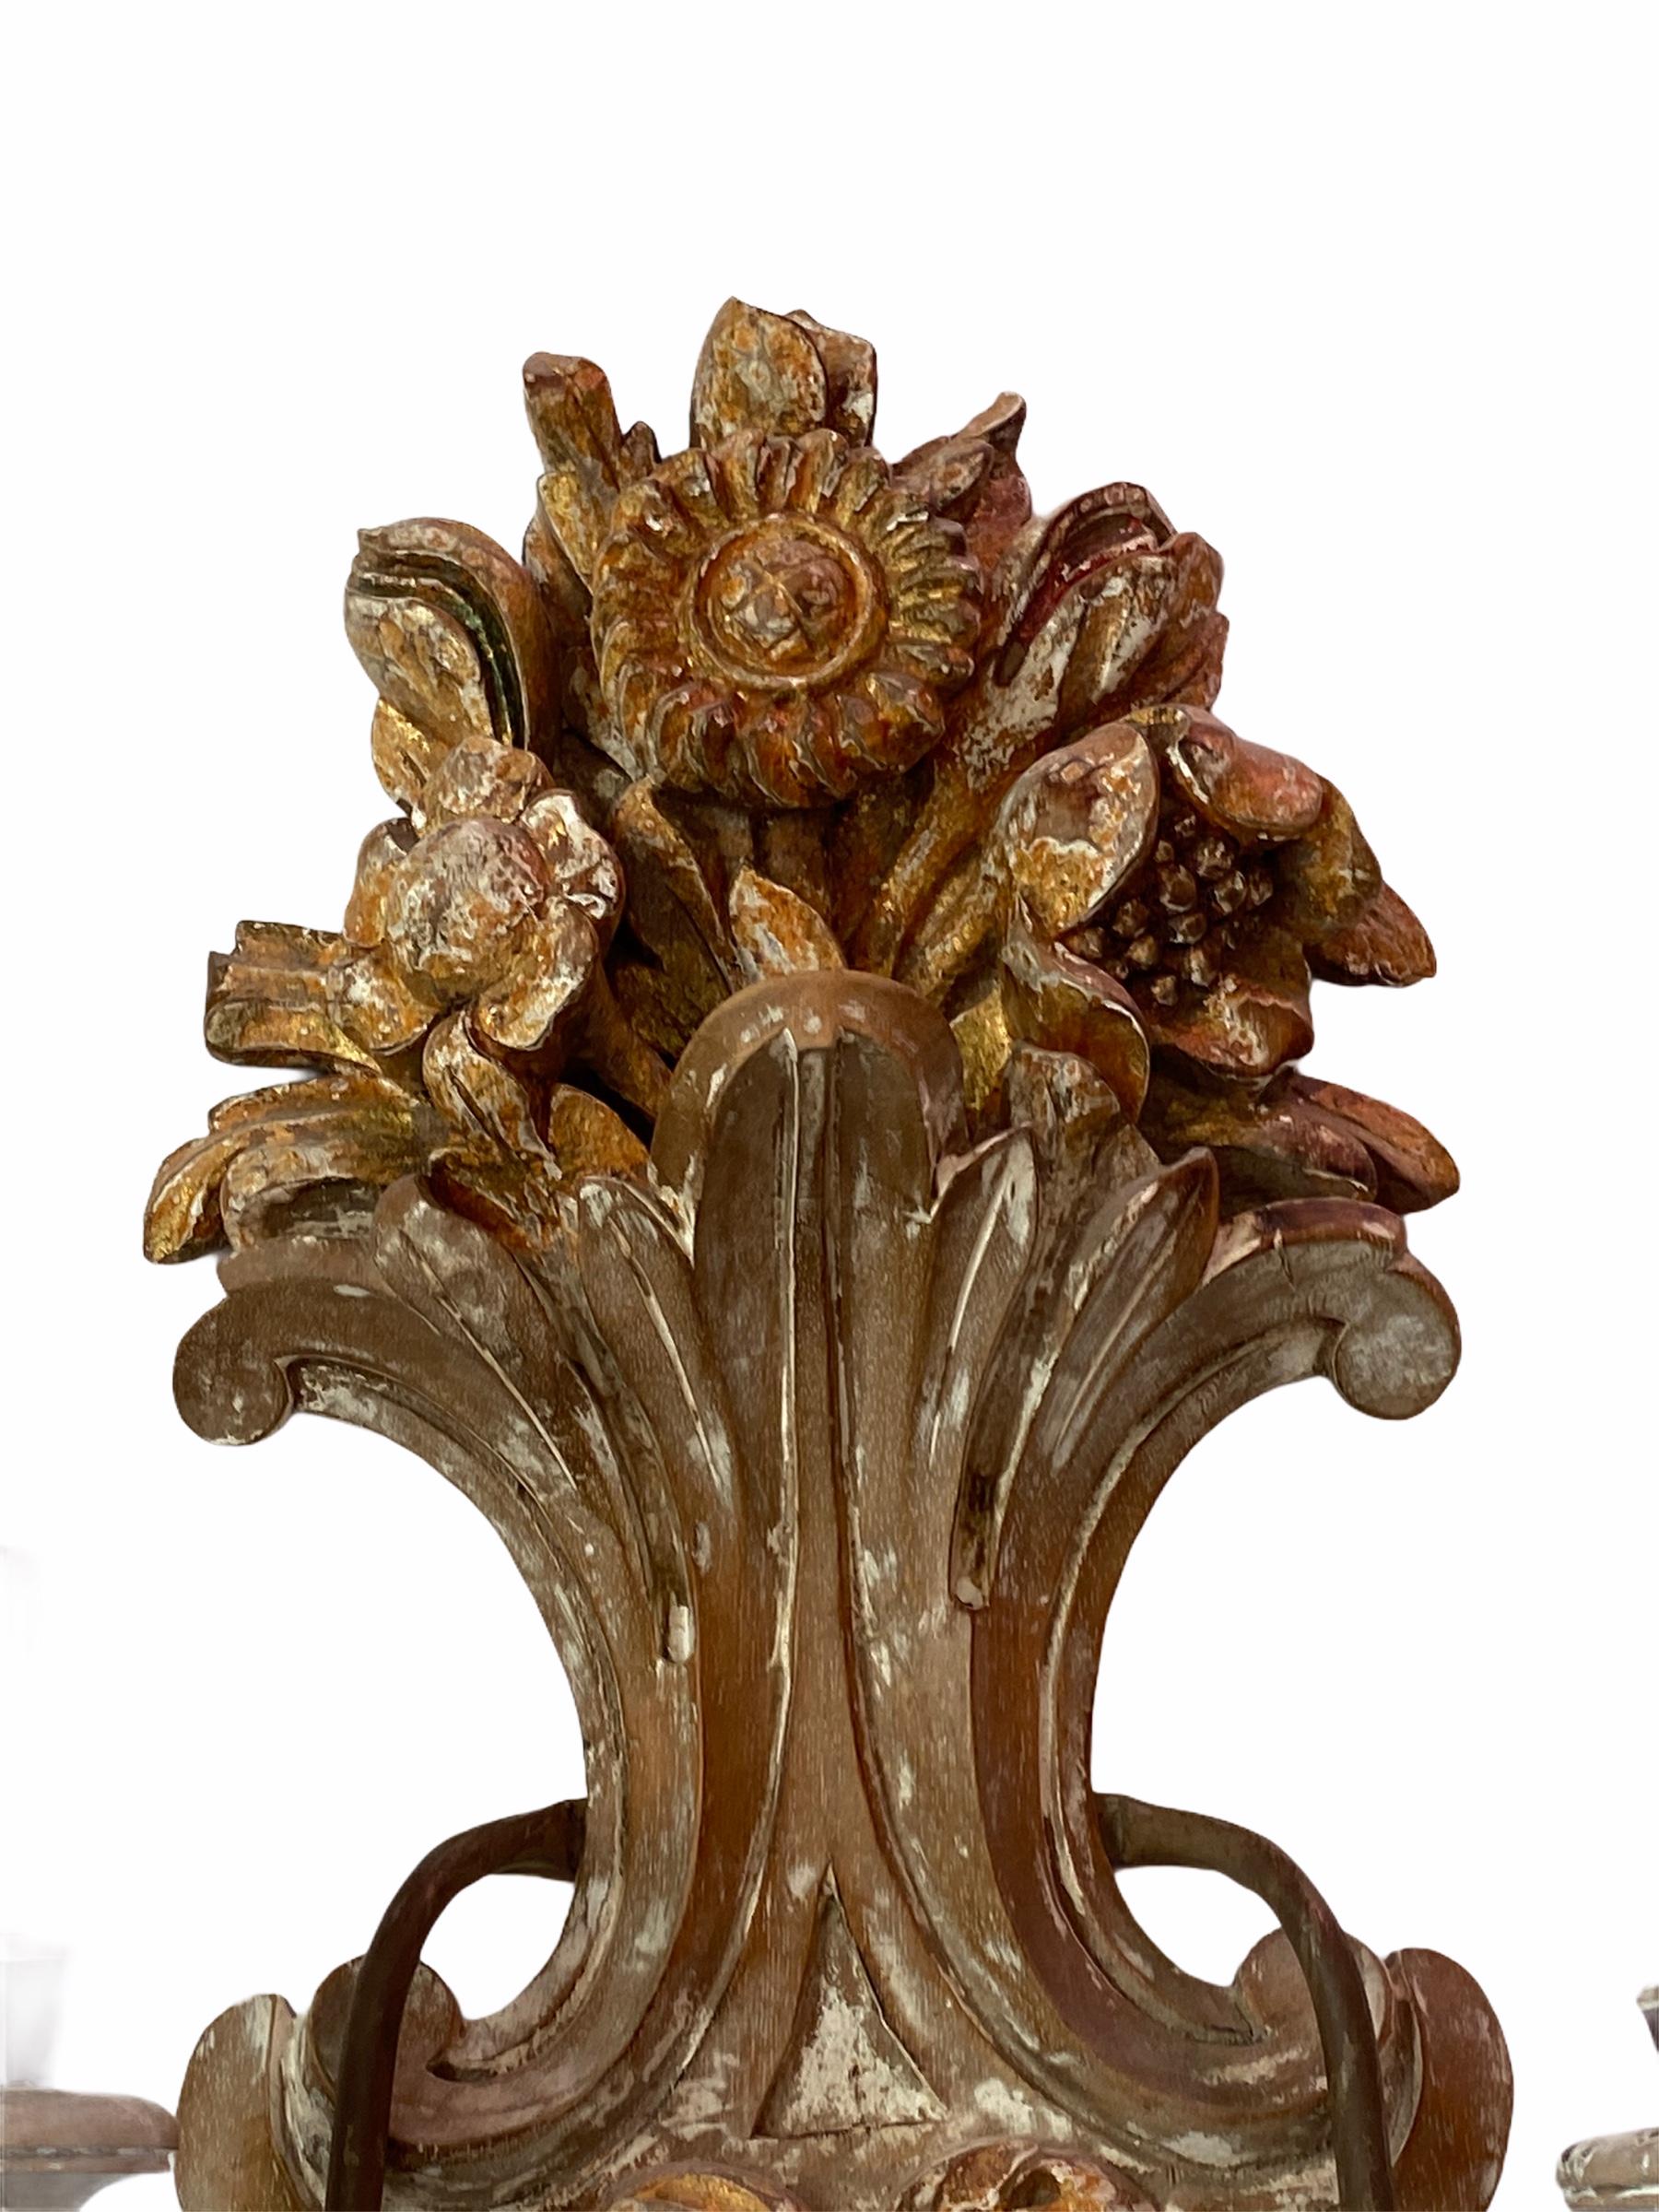 Mid-20th Century Pair of Wooden Carved Tole Toleware Sconces Chippywhite Gilt Flowers, Italy For Sale